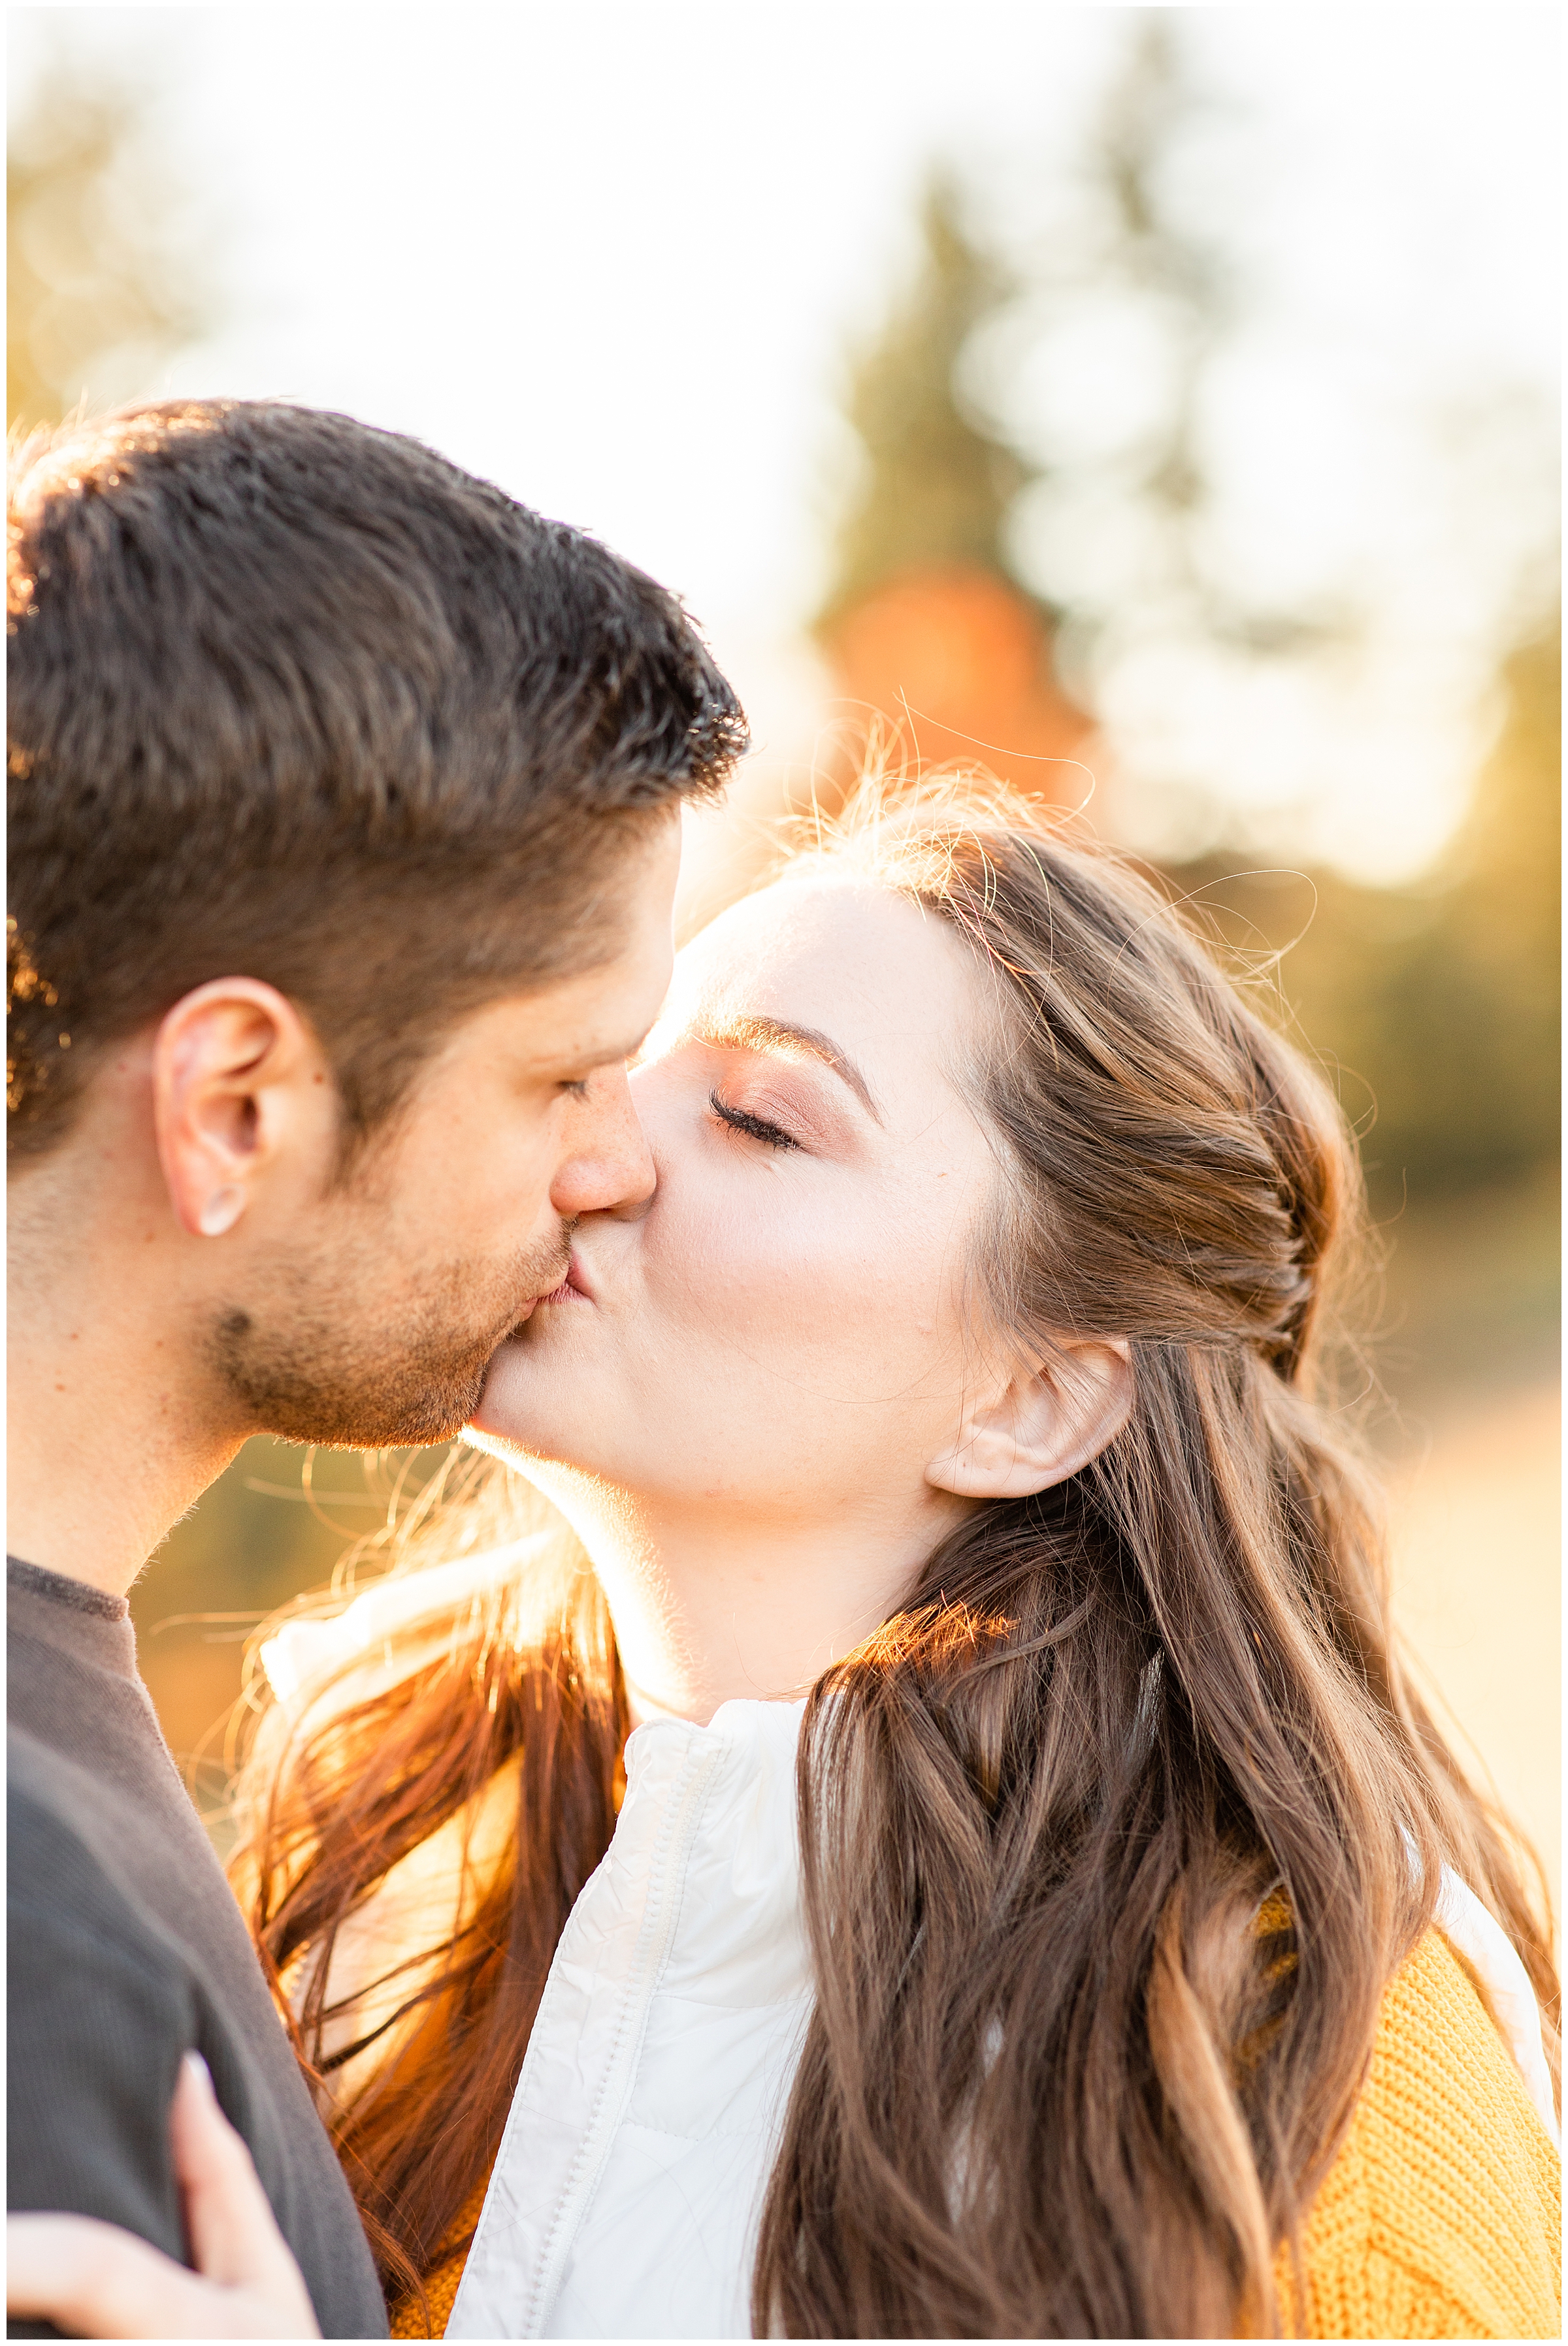 Jessica and Ben kissing at their engagement session